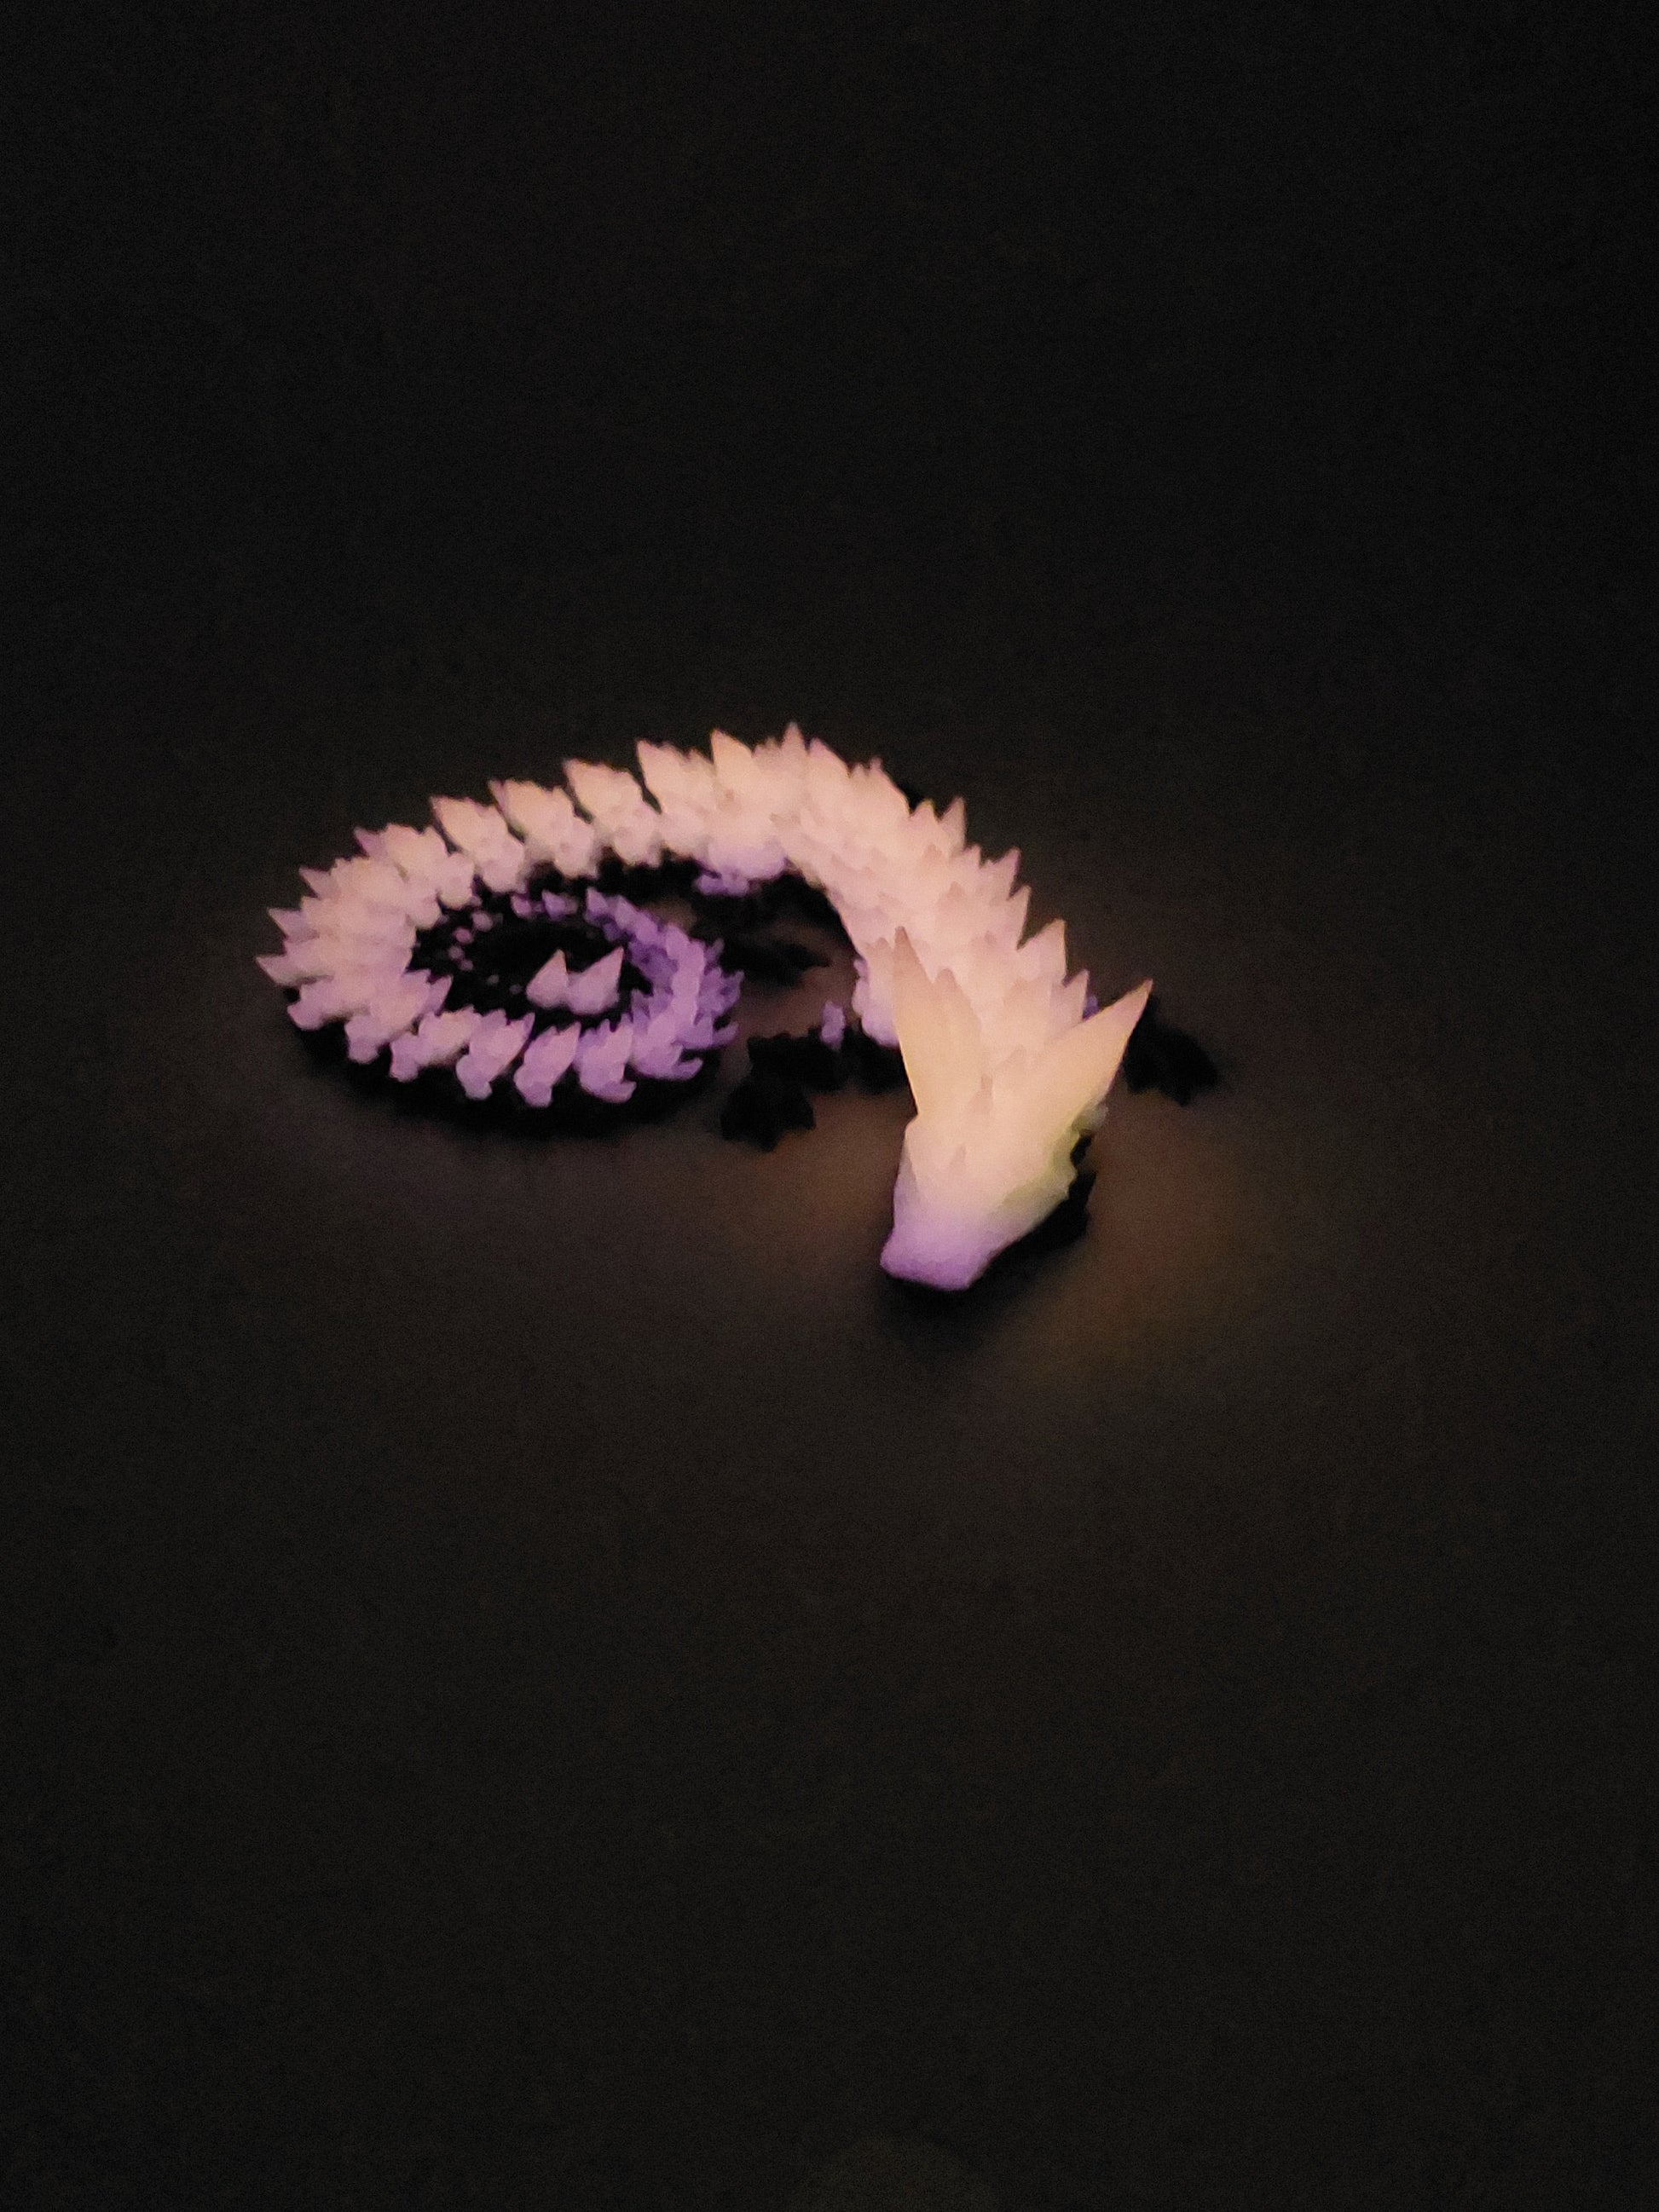 1 Articulated Glowing Crystal Dragon - 3D Printed Fidget Fantasy Creature - Customizable Colors - Cinderwing3d- 12 Inch